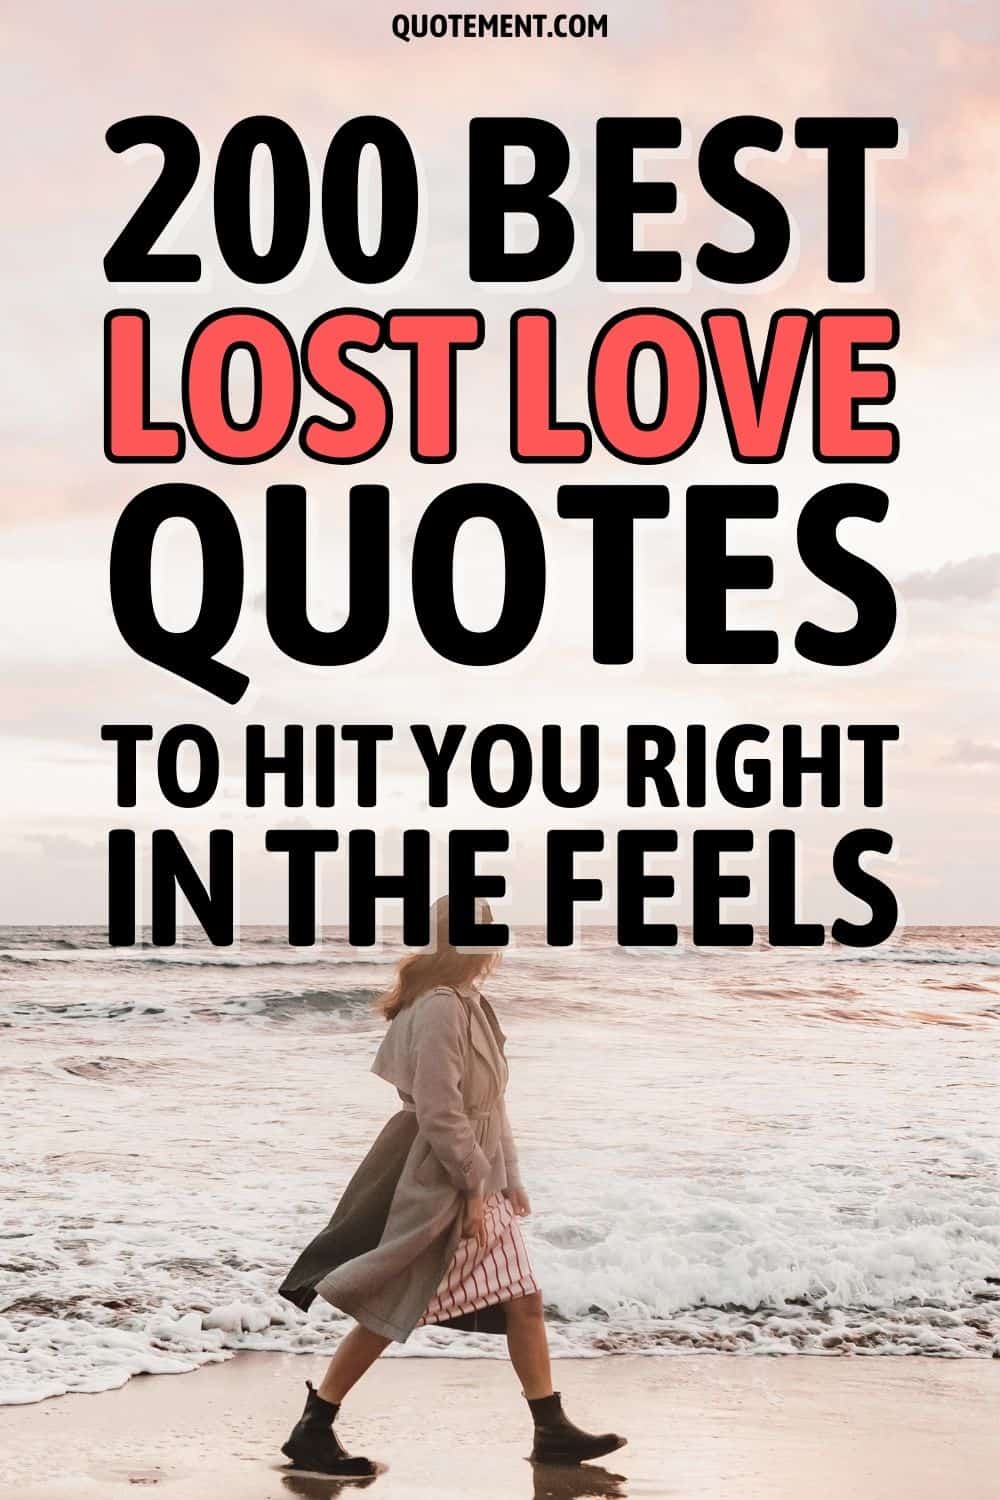 200 Best Lost Love Quotes To Hit You Right In The Feels